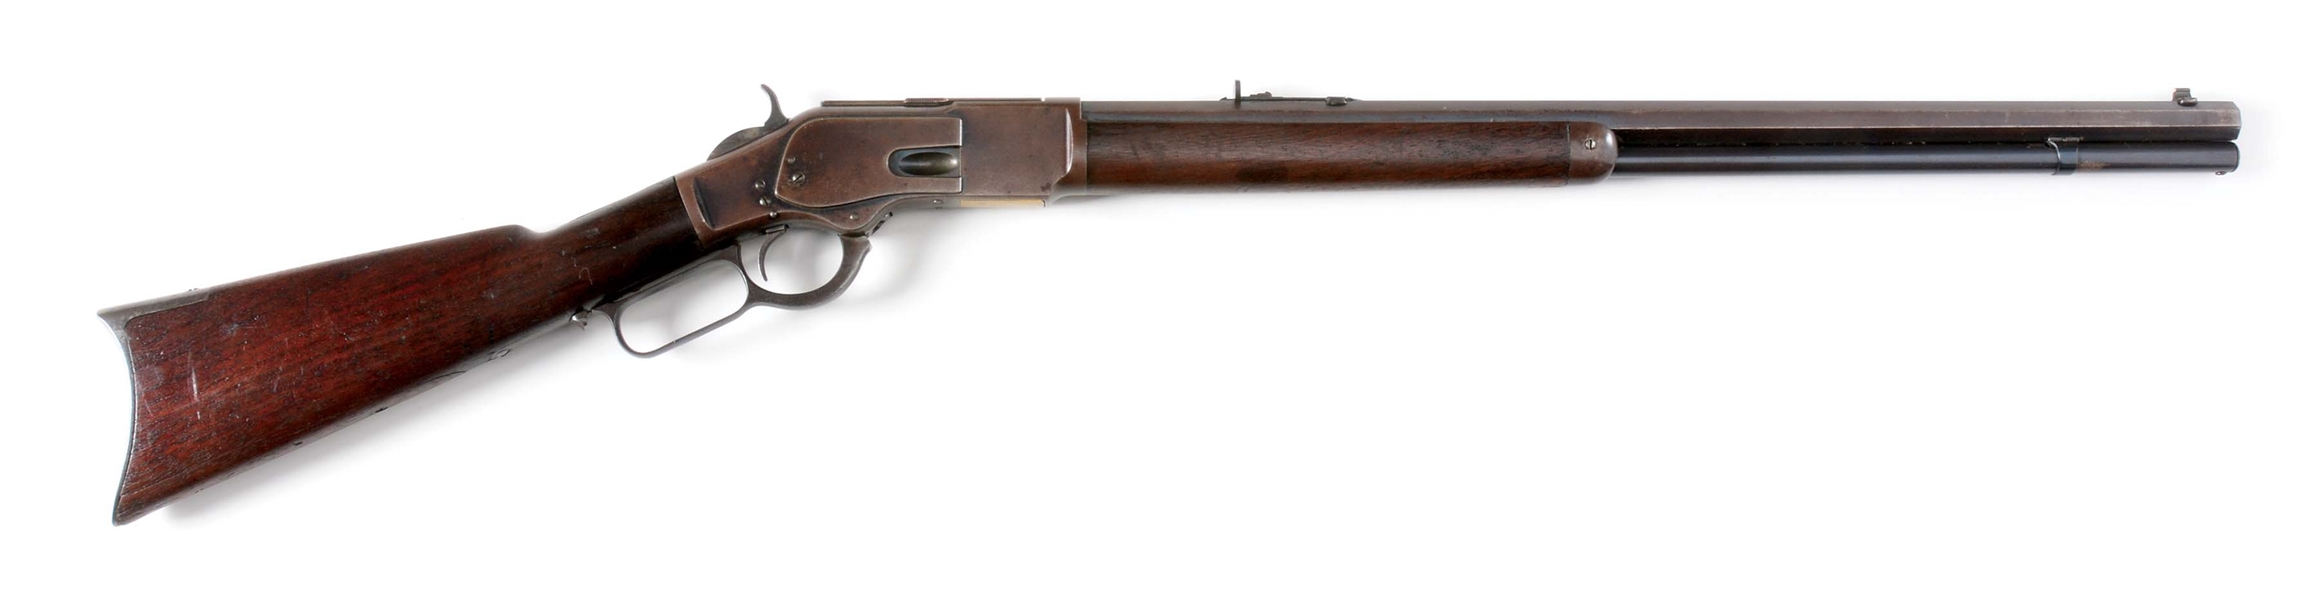 (A) SECOND MODEL WINCHESTER 1873 LEVER ACTION RIFLE (1879).